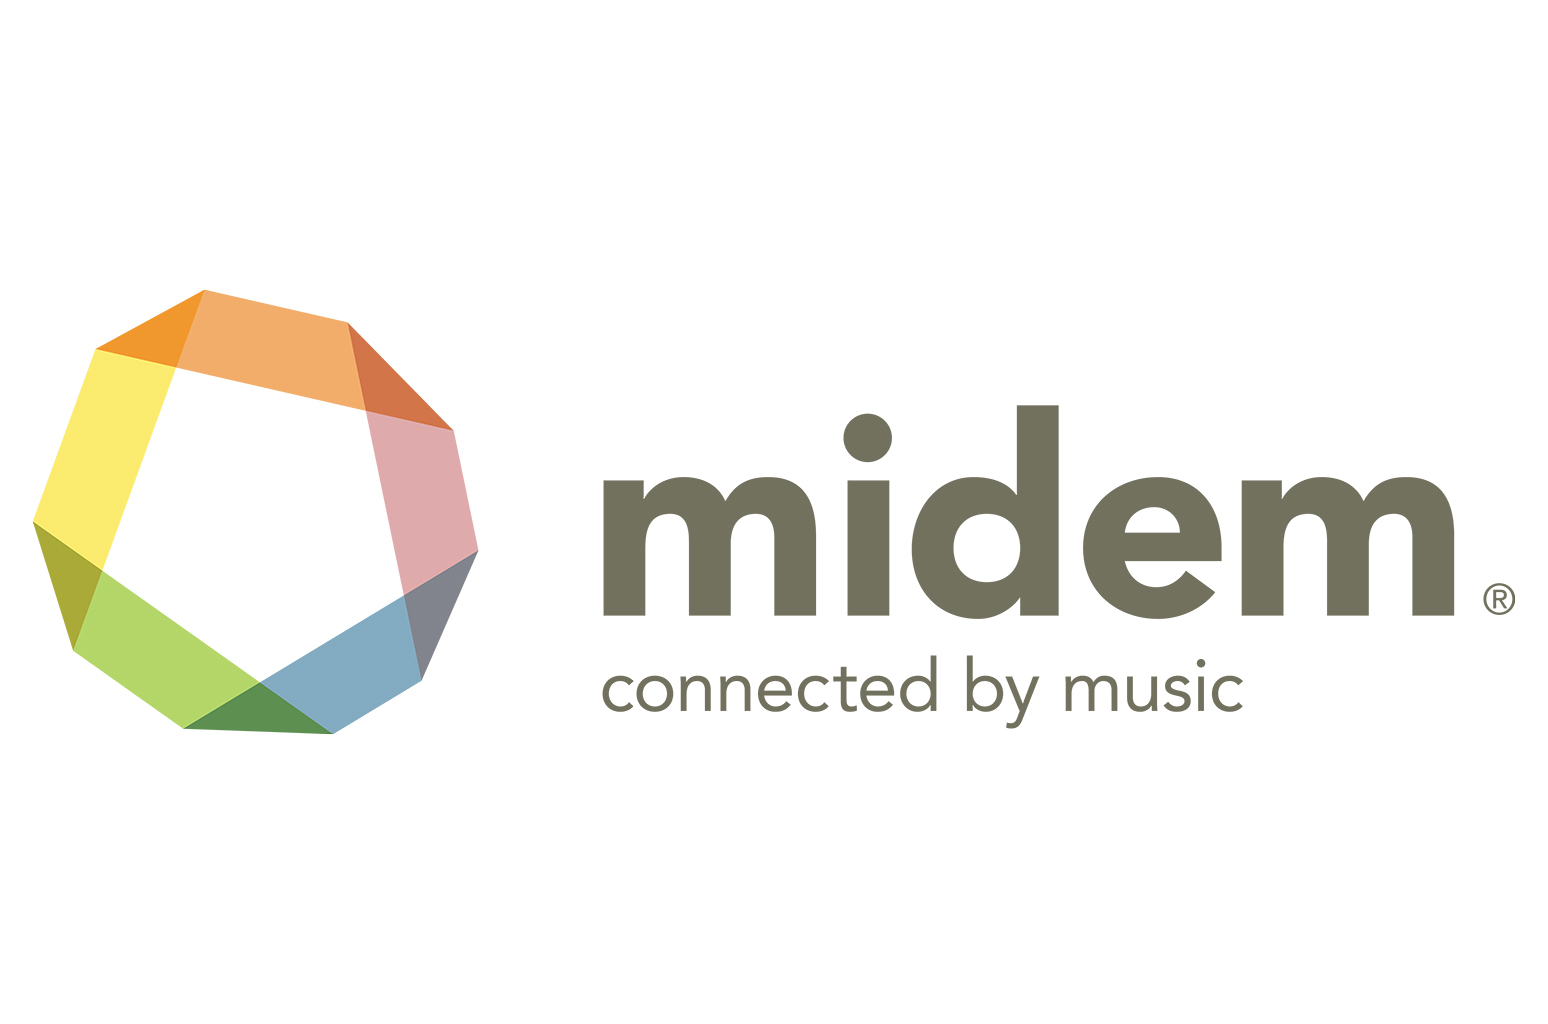 One Media iP to attend Midem